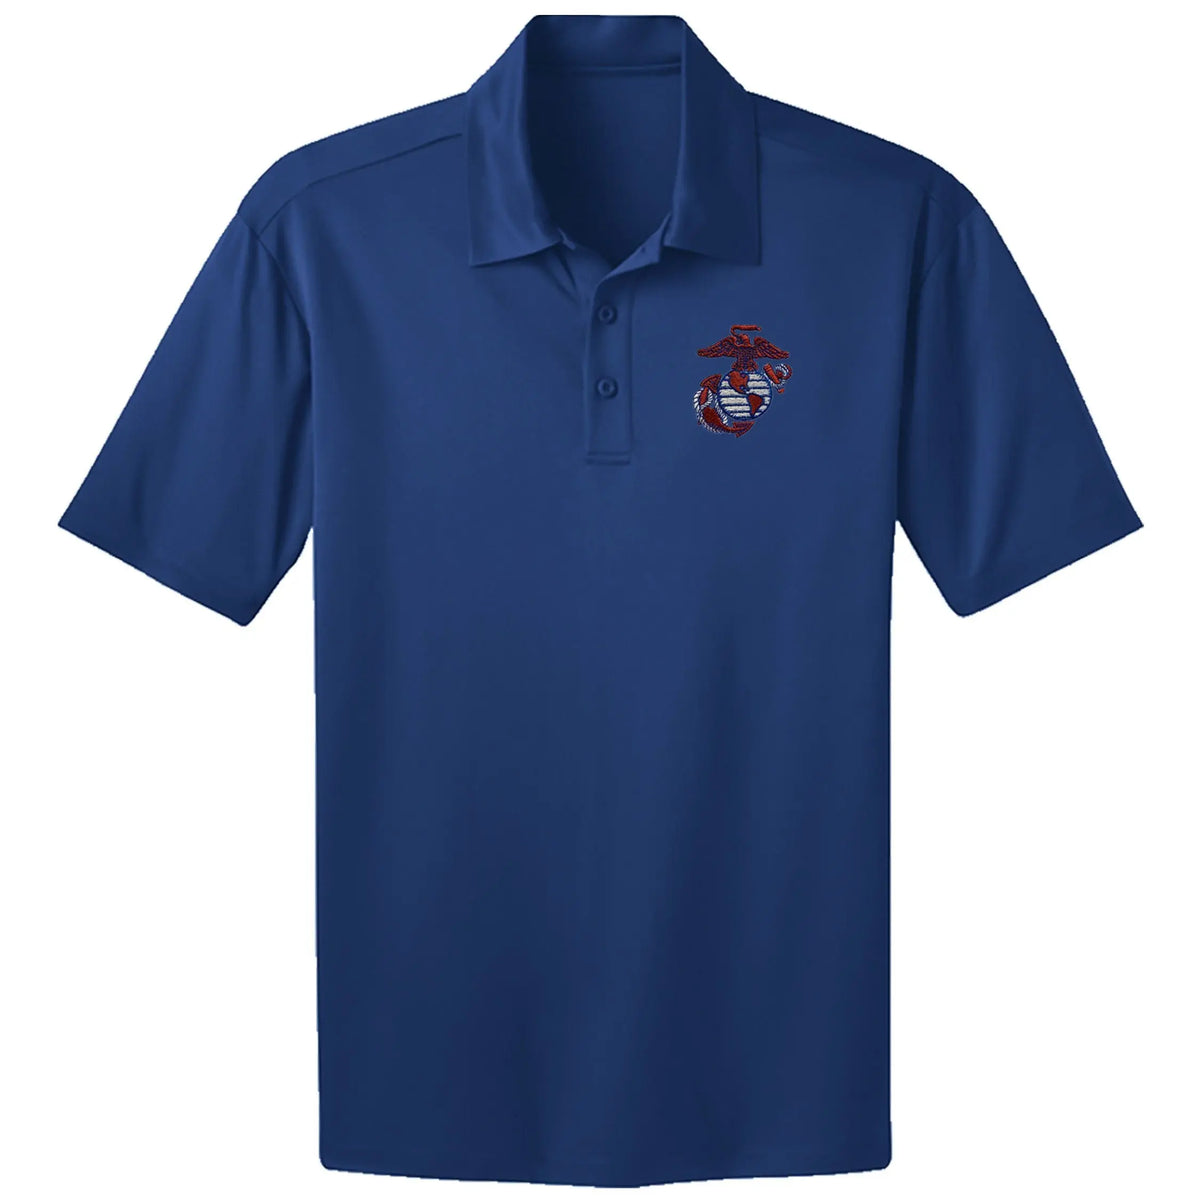 Under Armour Marines Bulldog Embroidered Performance Polo